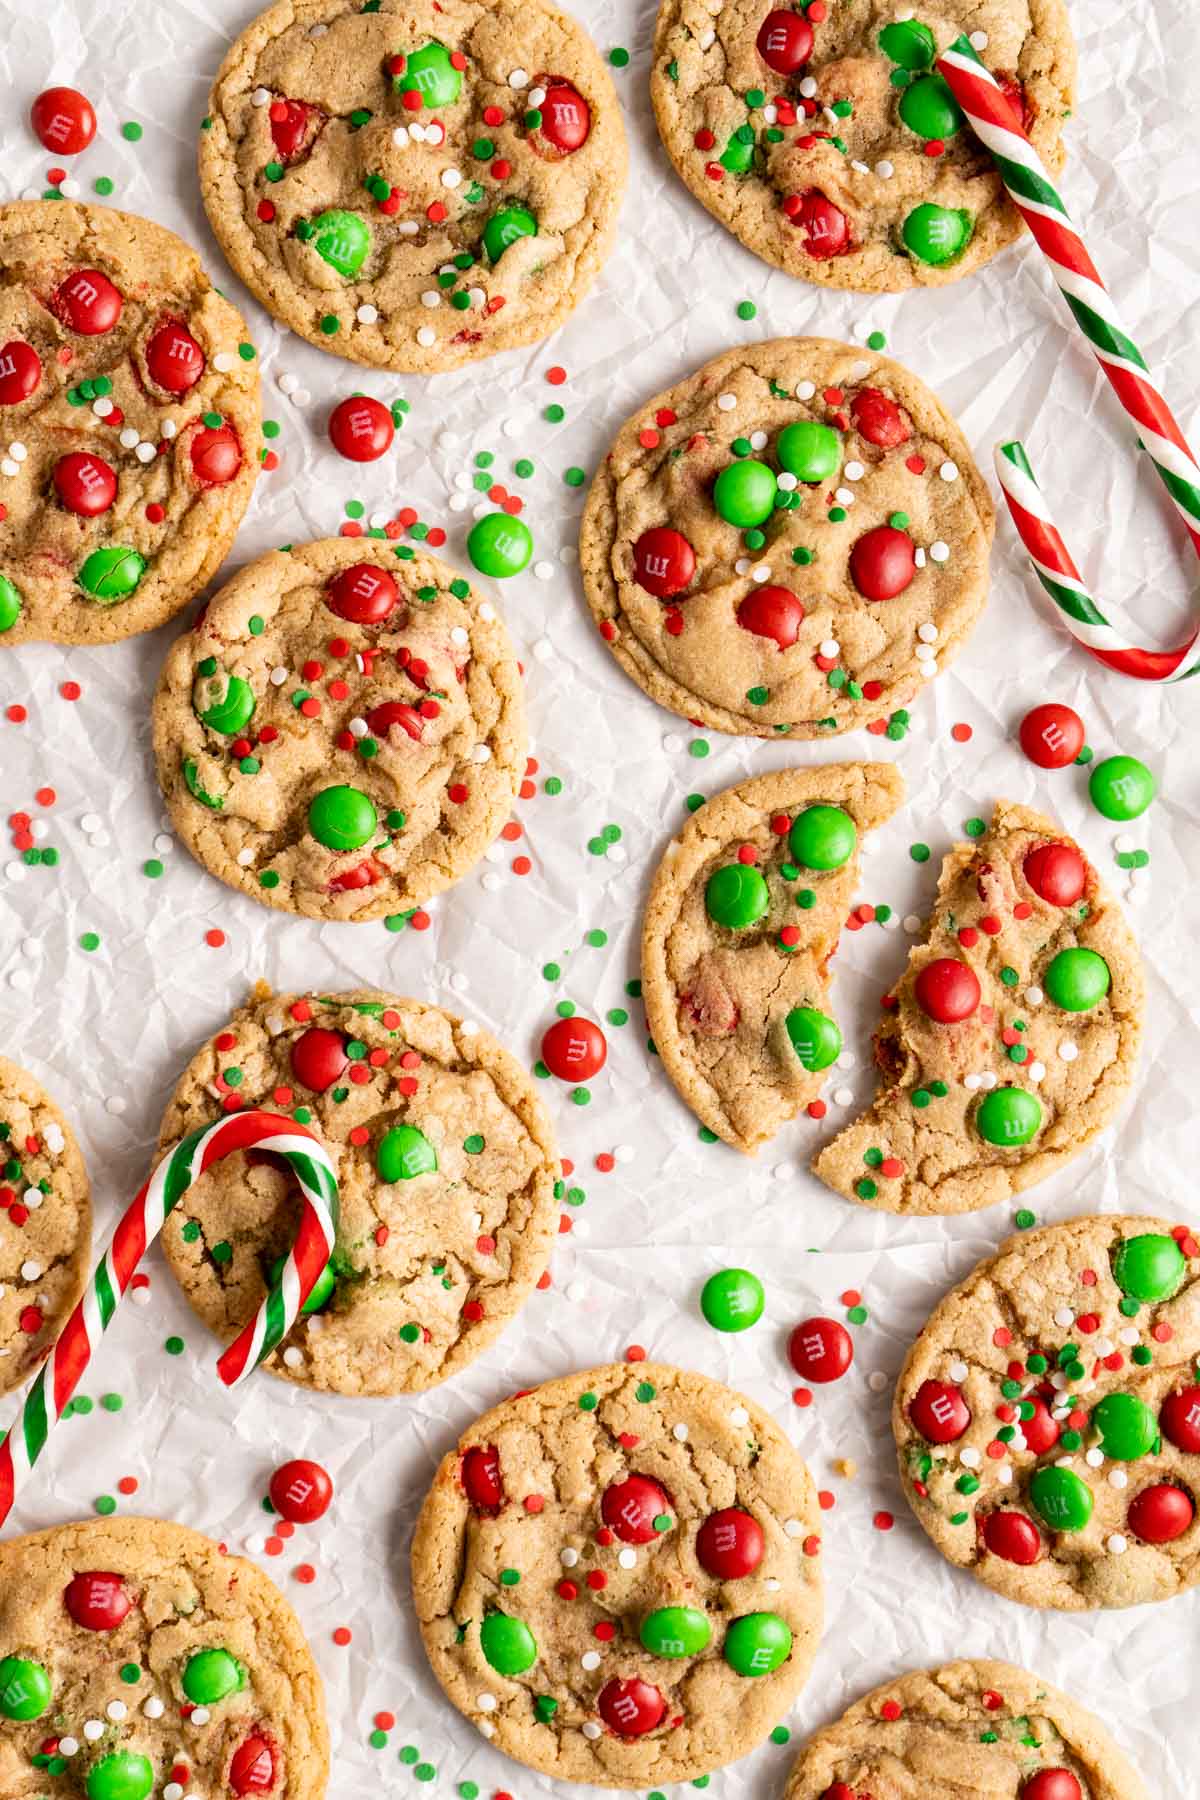 We Found the Best Cookie Scoop, Just In Time for Holiday Baking